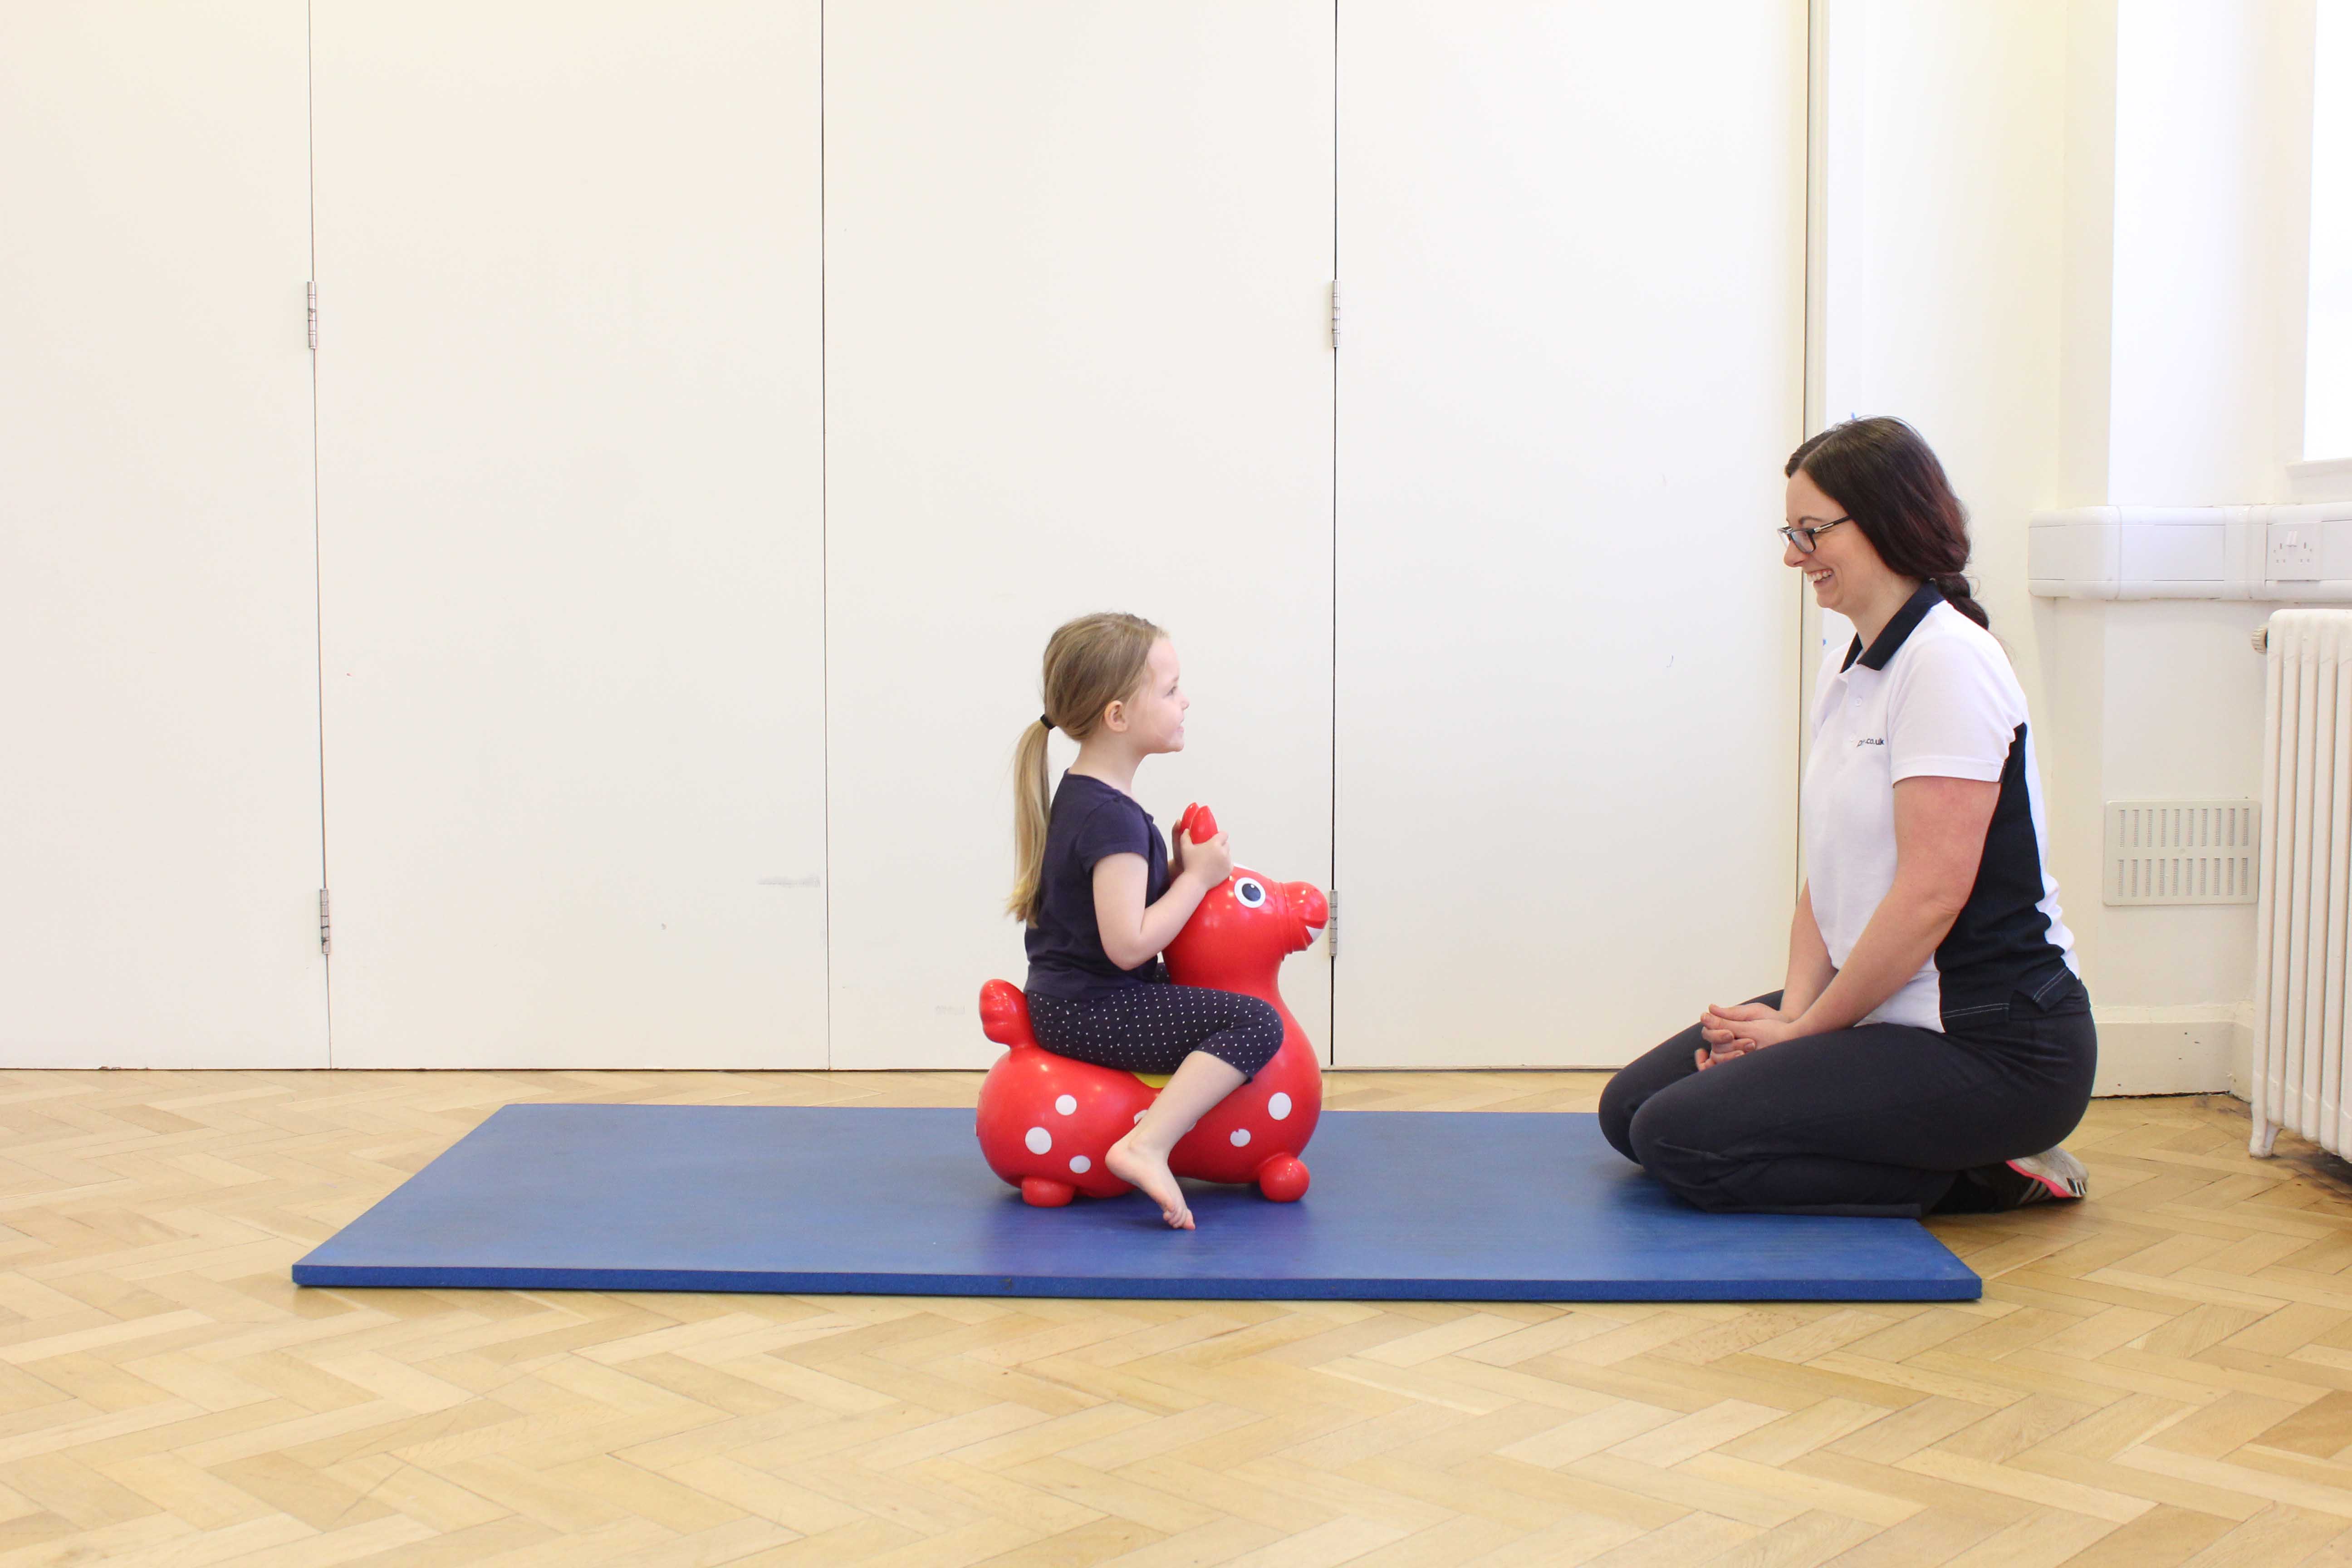 Treatning musculoskeletal conditions through exercises and play.